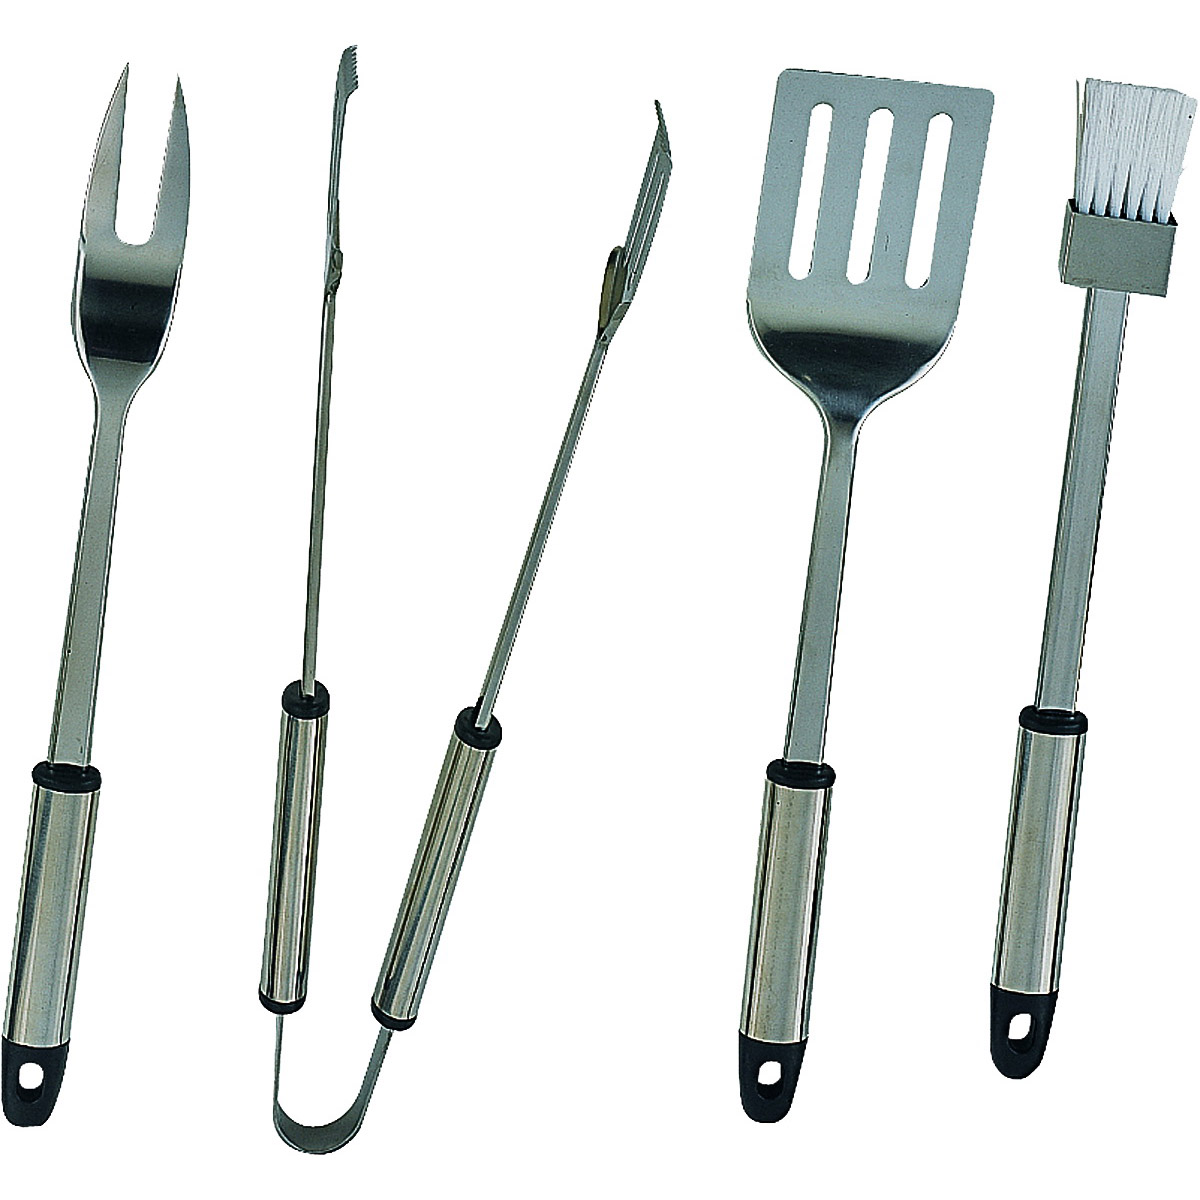 Barbecue Tool Set with Handle and Hanger, 1.5 mm Gauge, Stainless Steel Blade, Stainless Steel